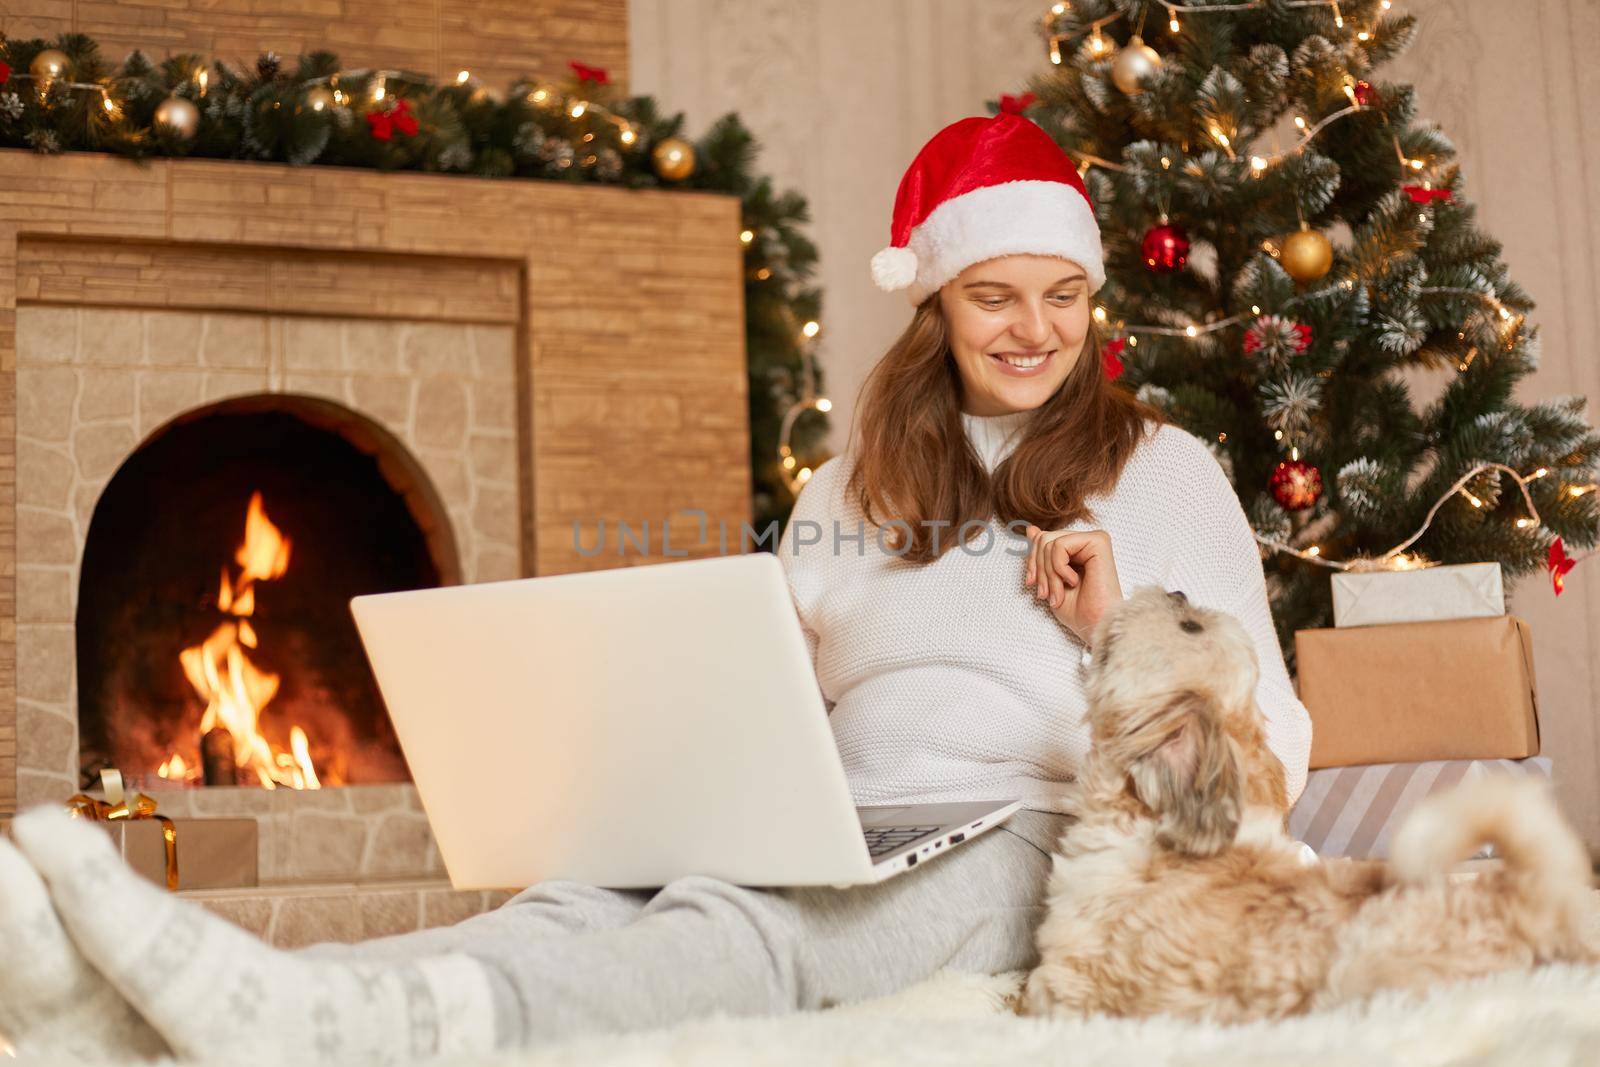 Charming woman sitting on floor with laptop, looks at her pet who sits near her, happy female wears red hat and casual sweater, lady with pekingese dog pose in festive Christmas room near fireplace. by sementsovalesia